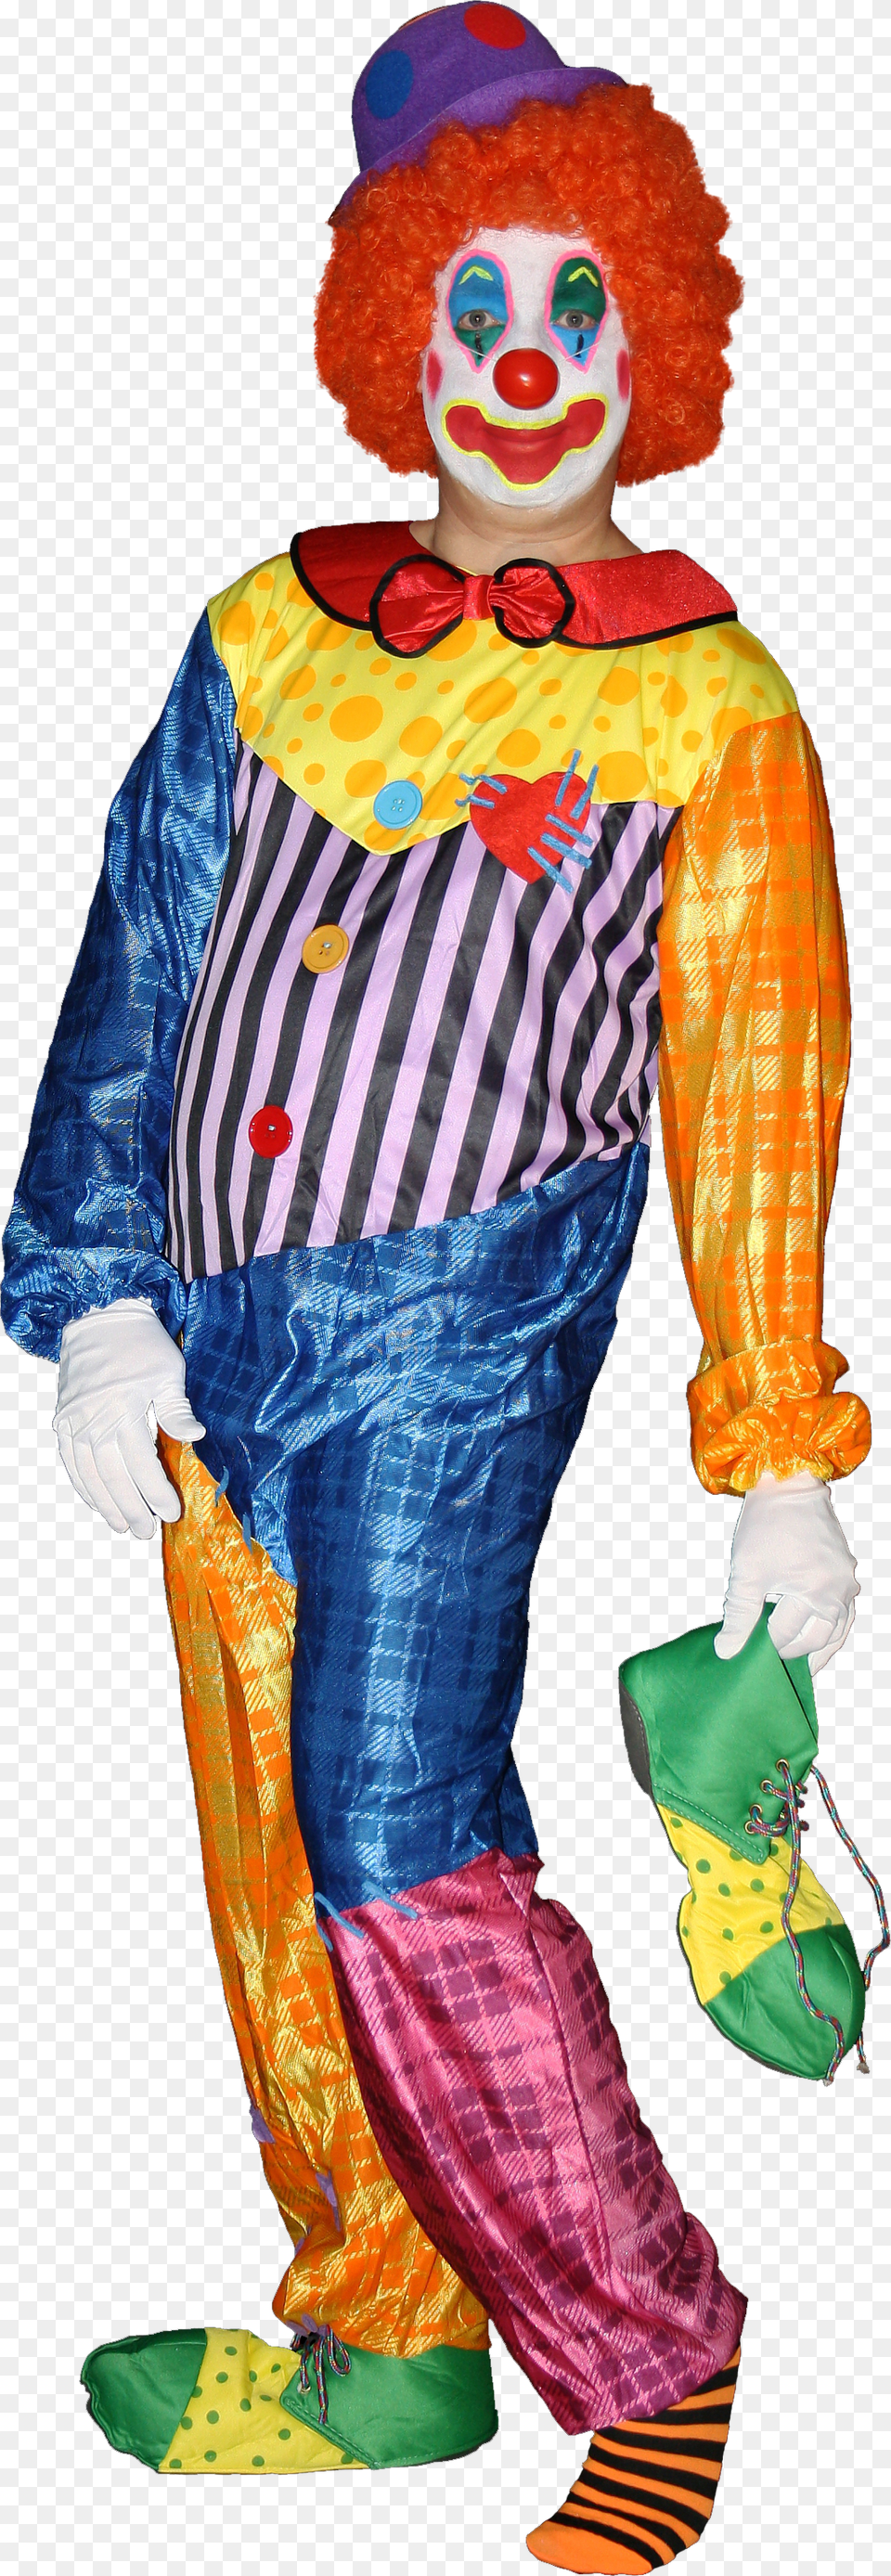 File Clown Cutout Clown, Clothing, Person, Performer, Glove Png Image